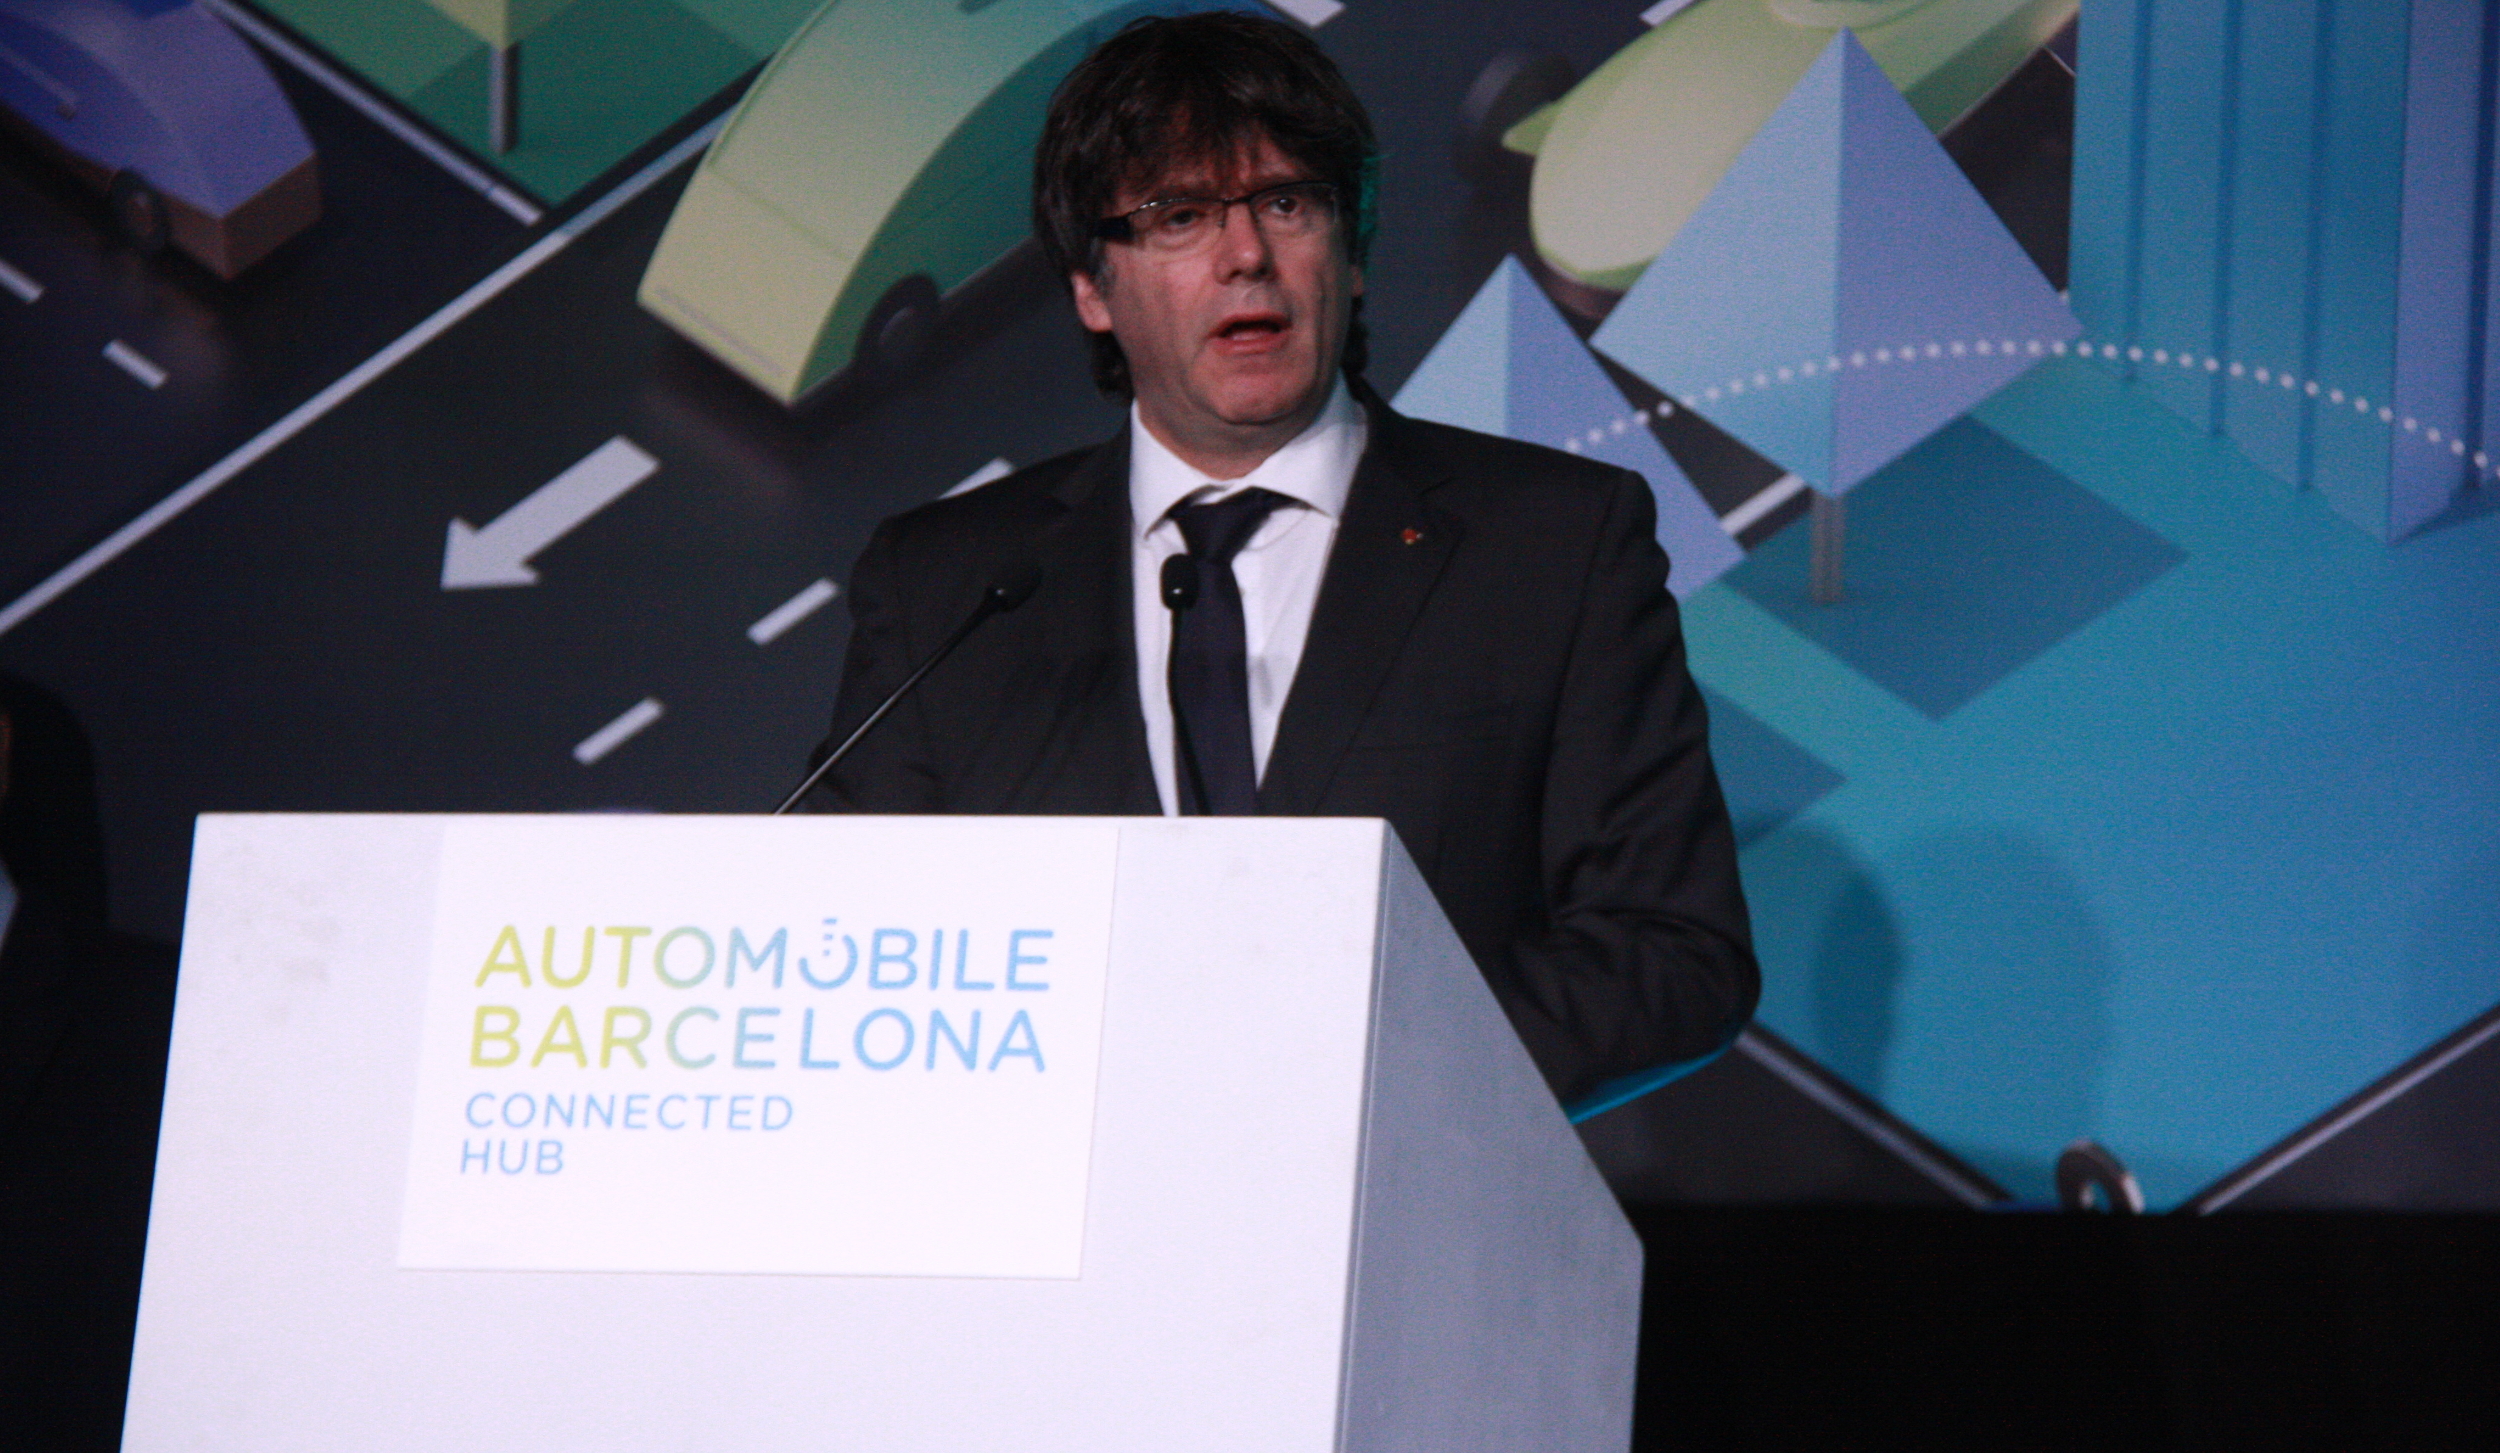 Catalan President, Carles Puigdemont, during the inauguration of 'Automobile Barcelona' at Fira de Barcelona (by ACN)